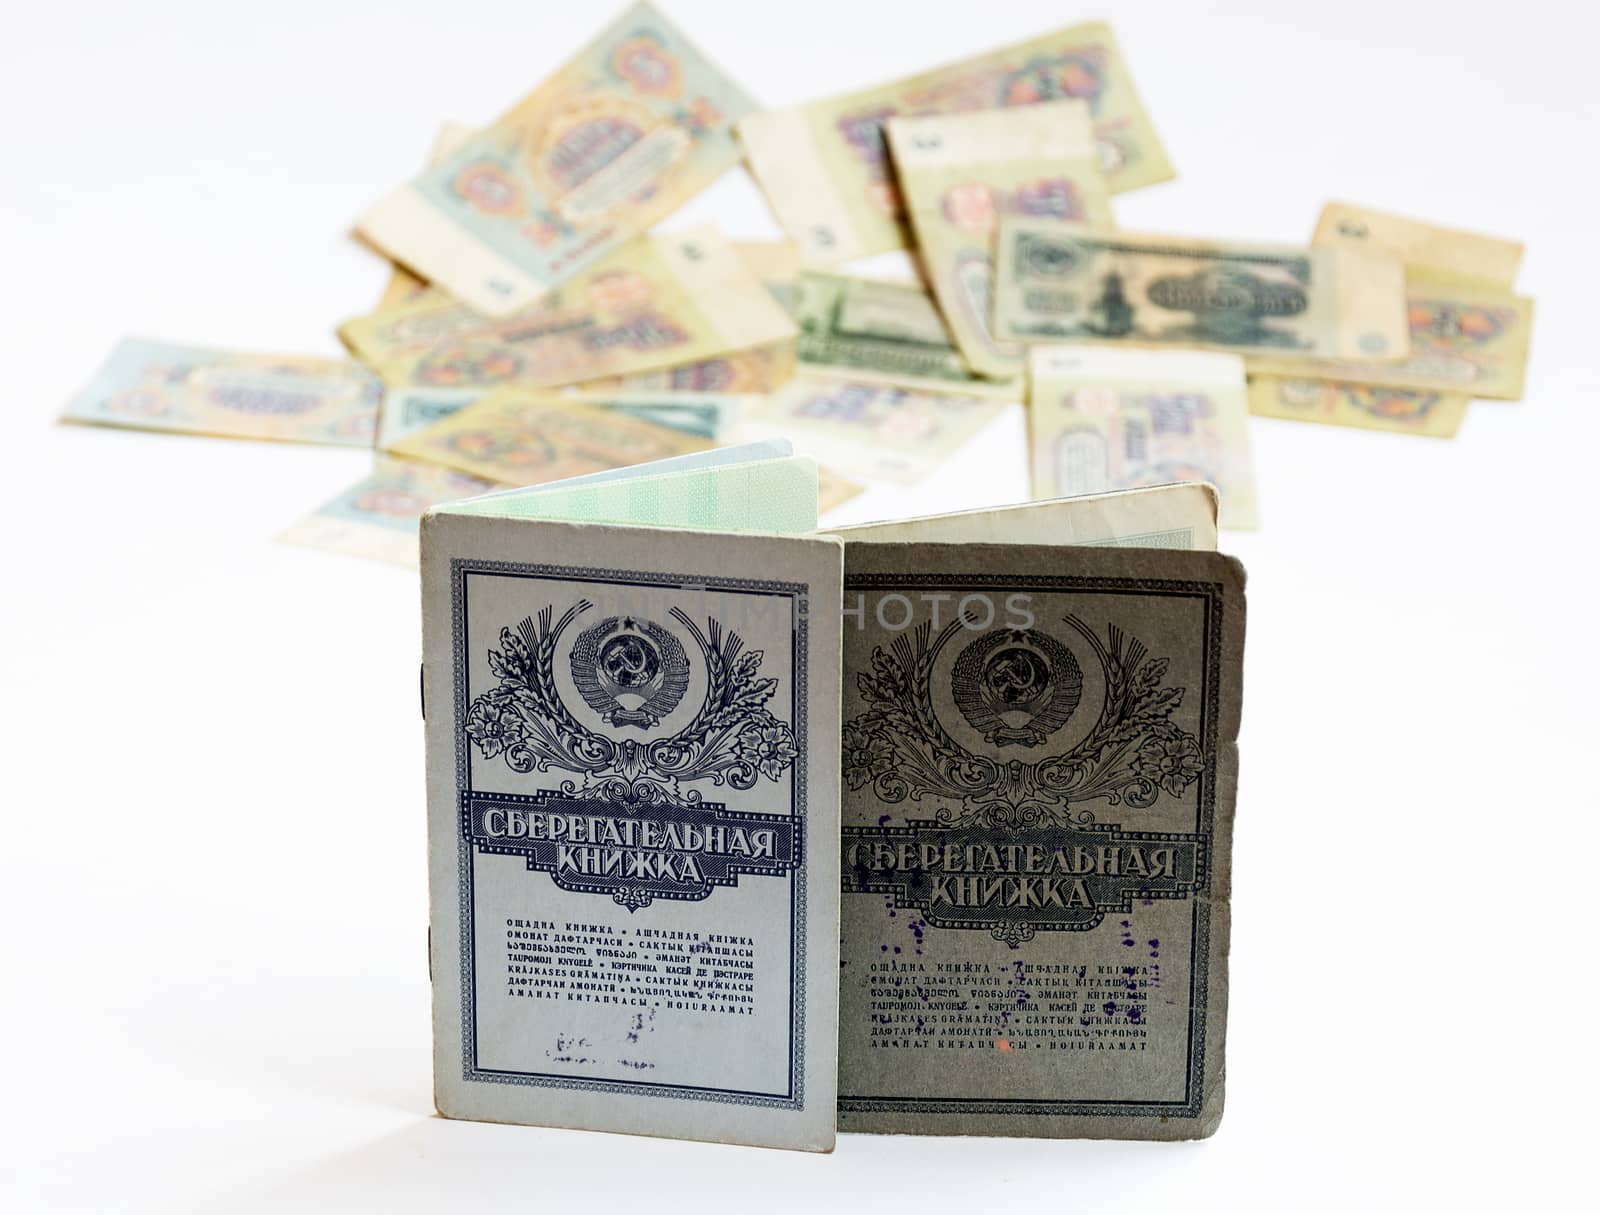 Savings books of the Soviet Union, are standing upright. In the background is seen the Soviet rubles without harshness